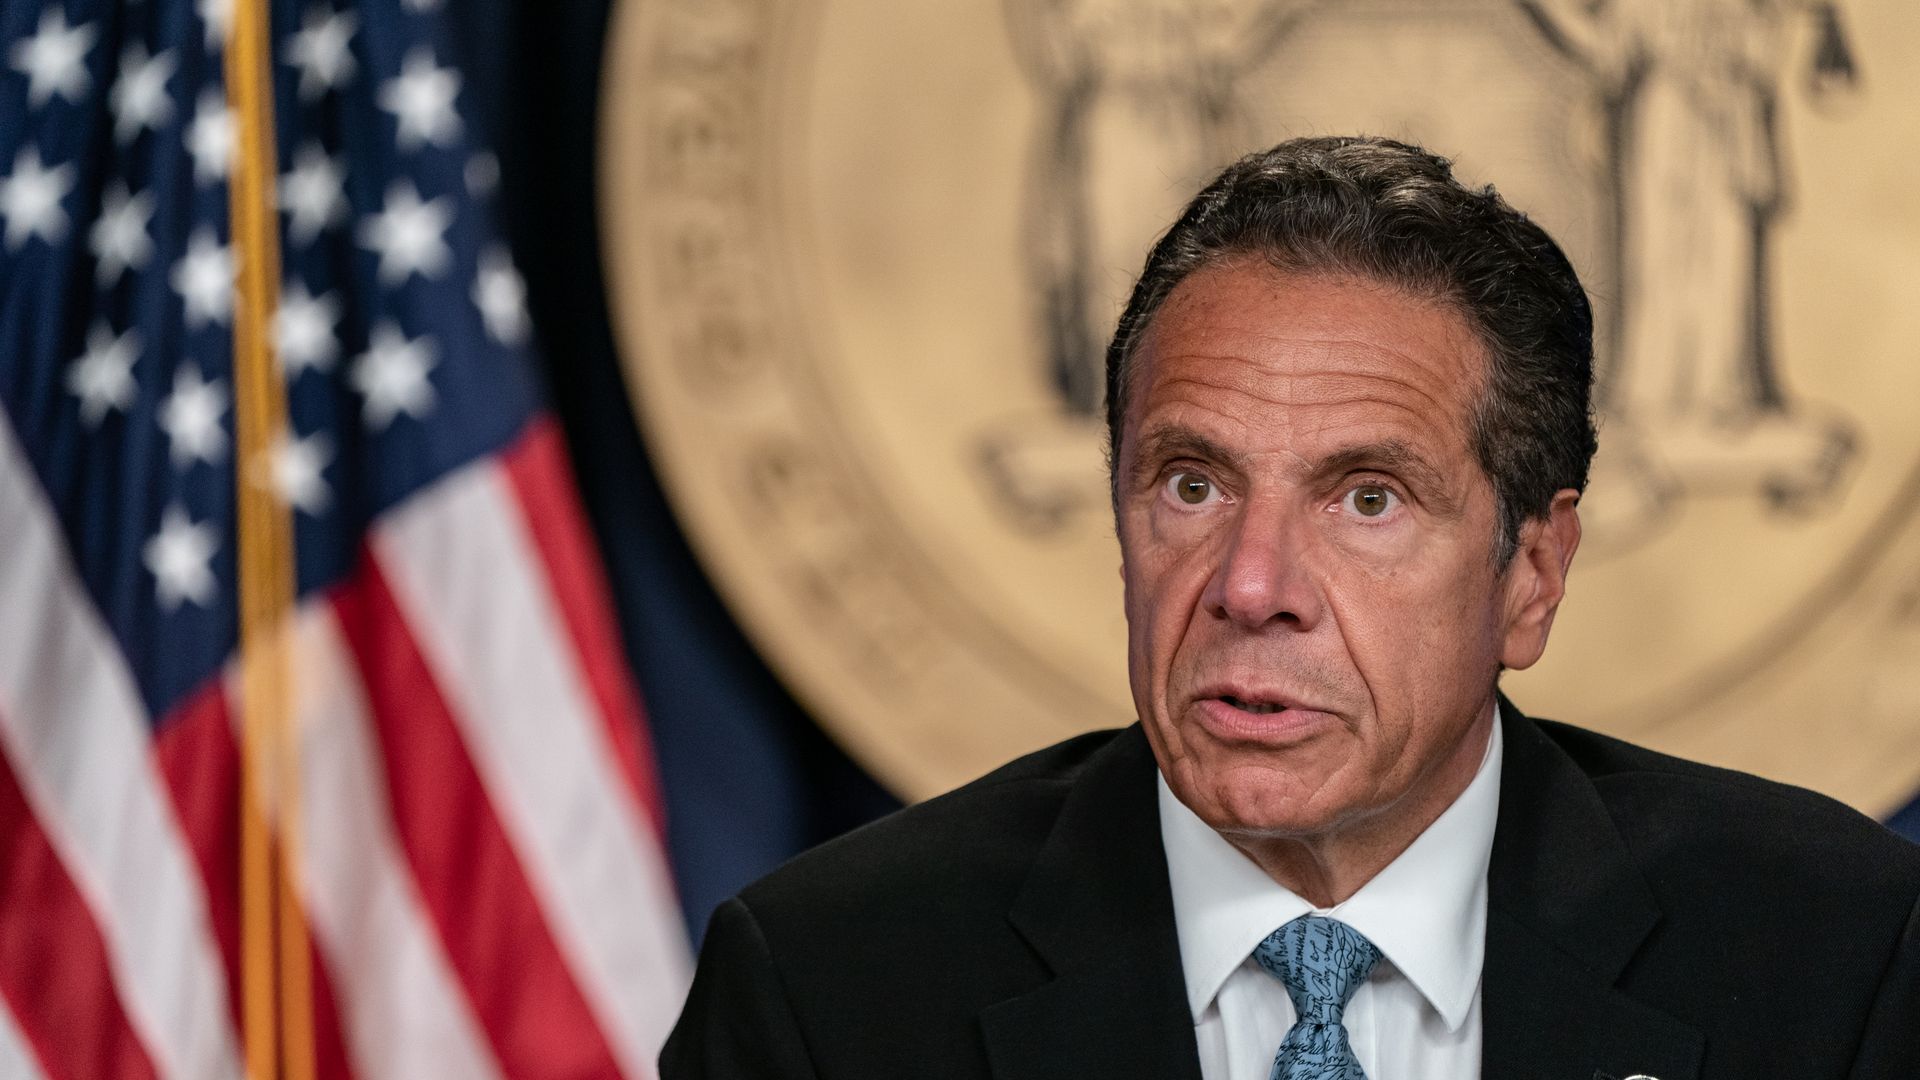 New York Gov. Andrew Cuomo speaks during the daily media briefing at the Office of the Governor of the State of New York